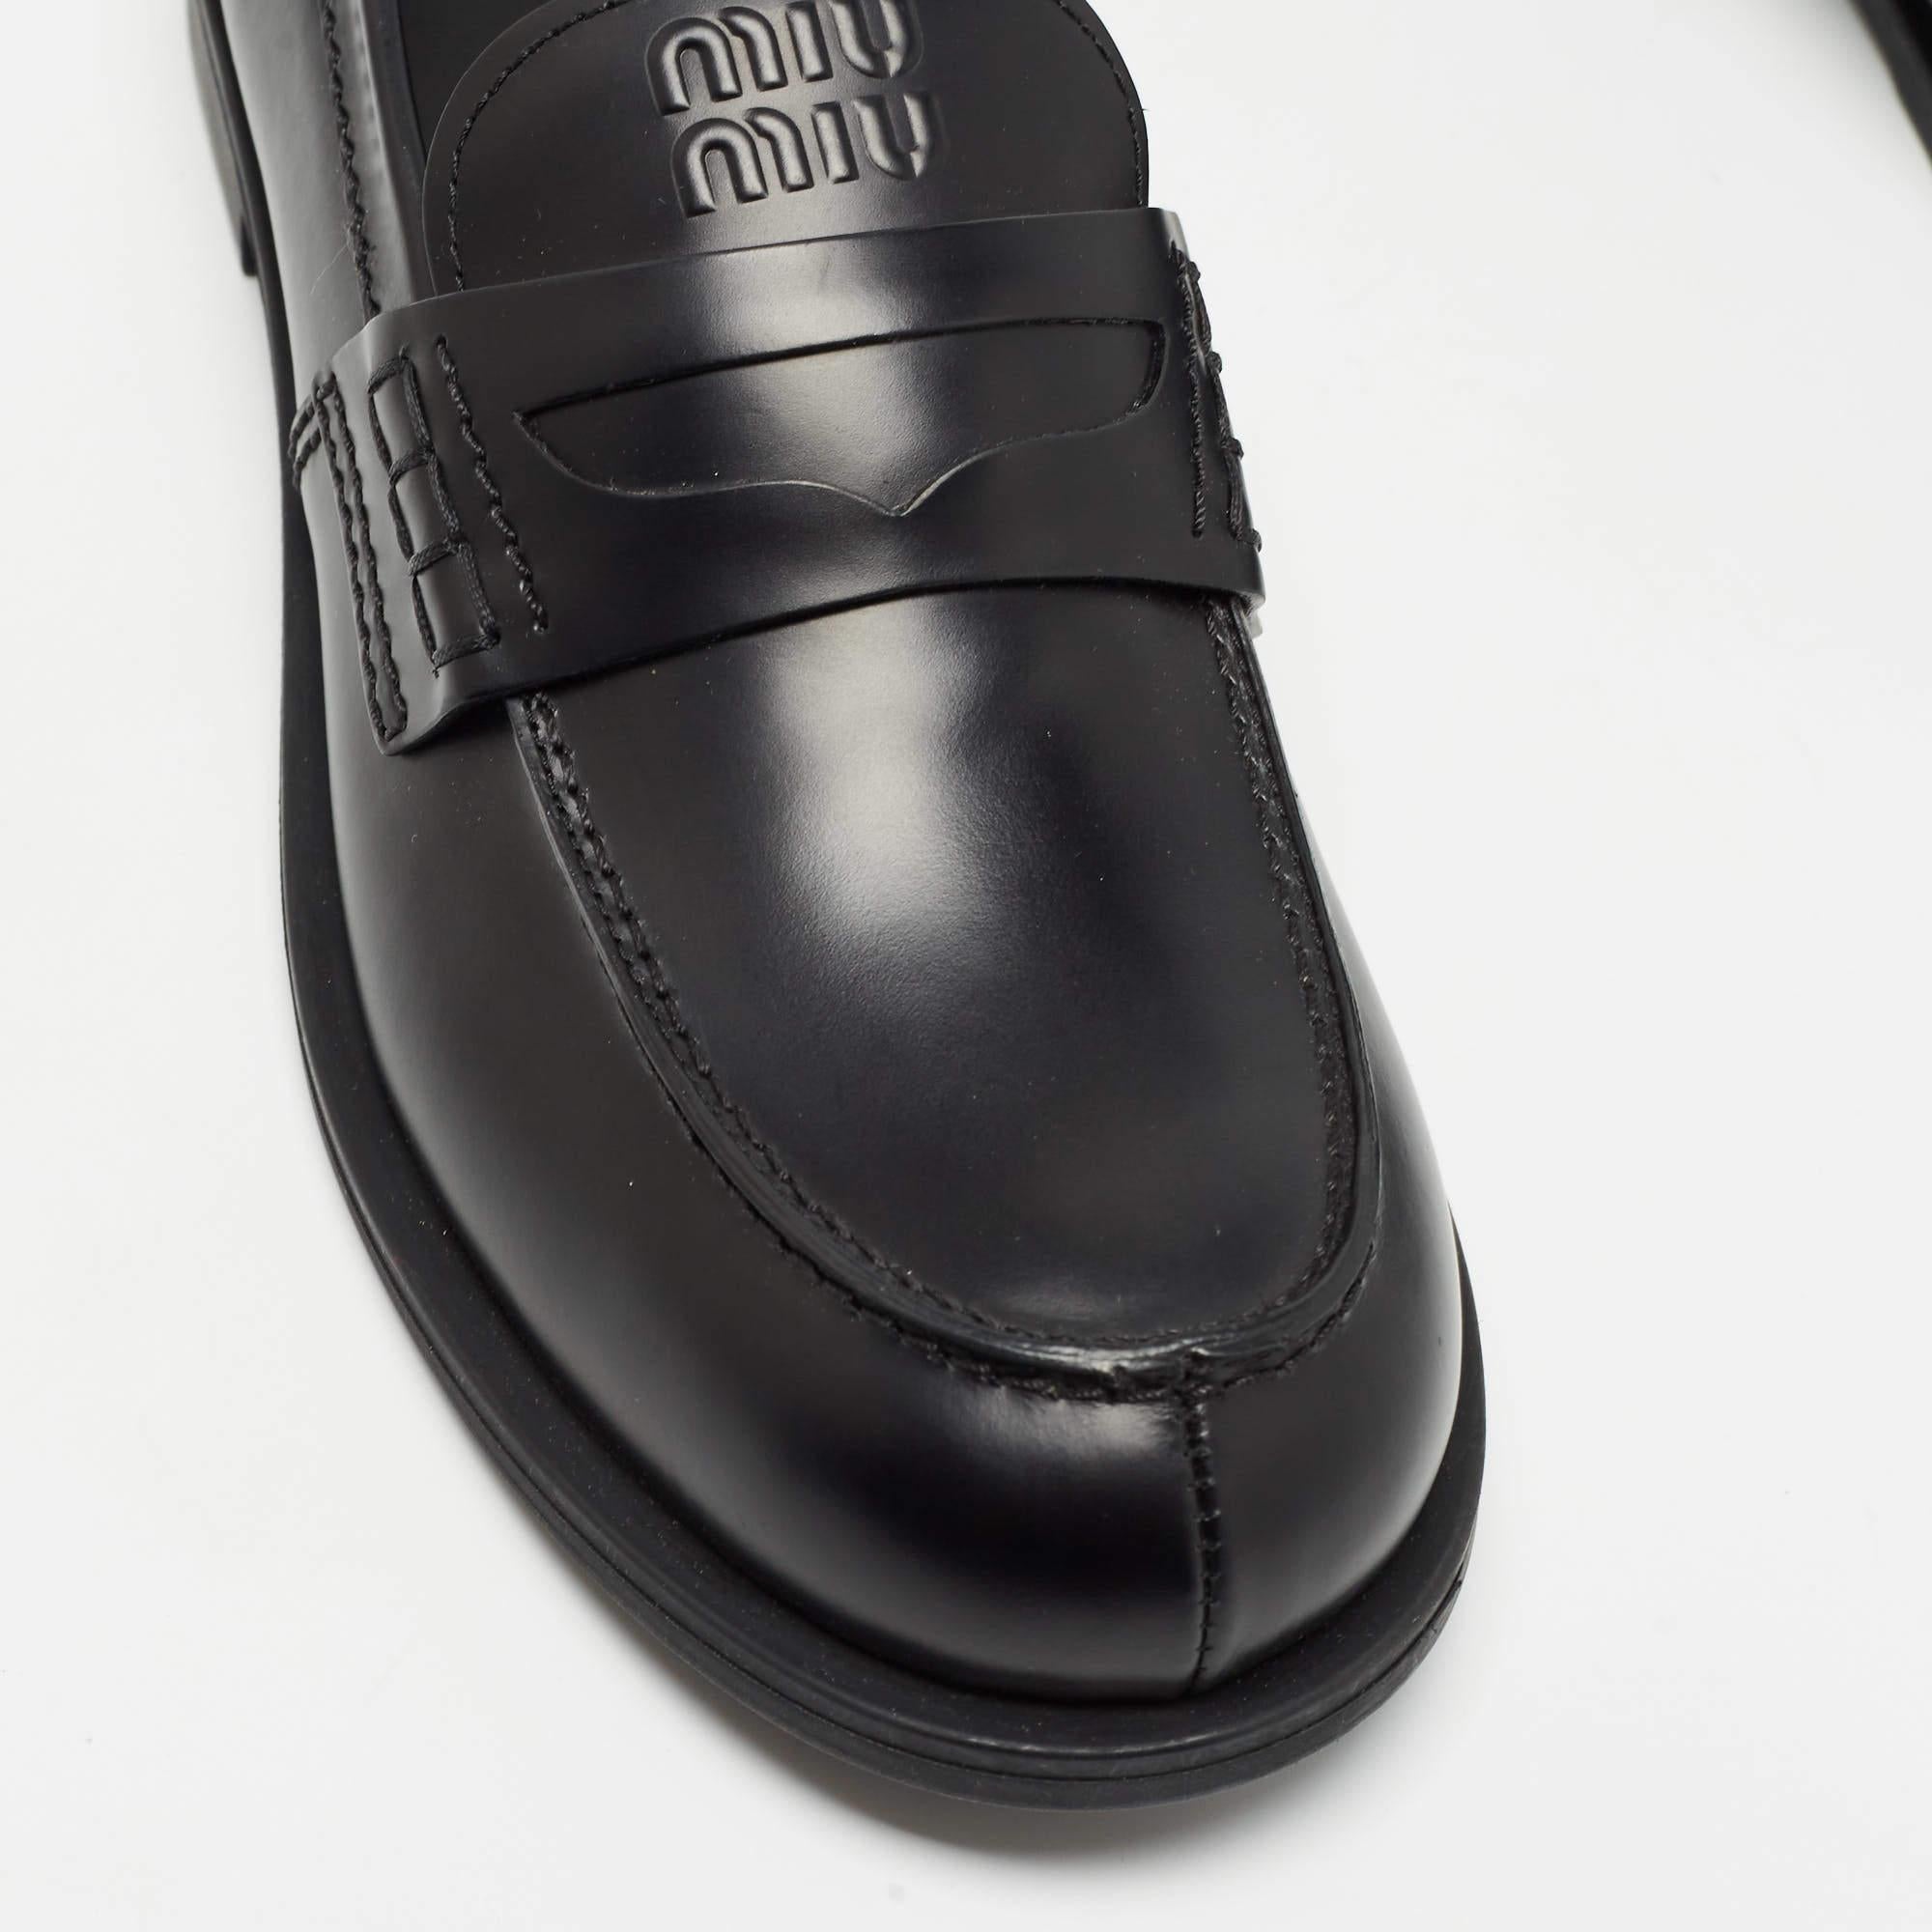 Miu Miu Black Leather Slip On Loafers Size 39.5 For Sale 3